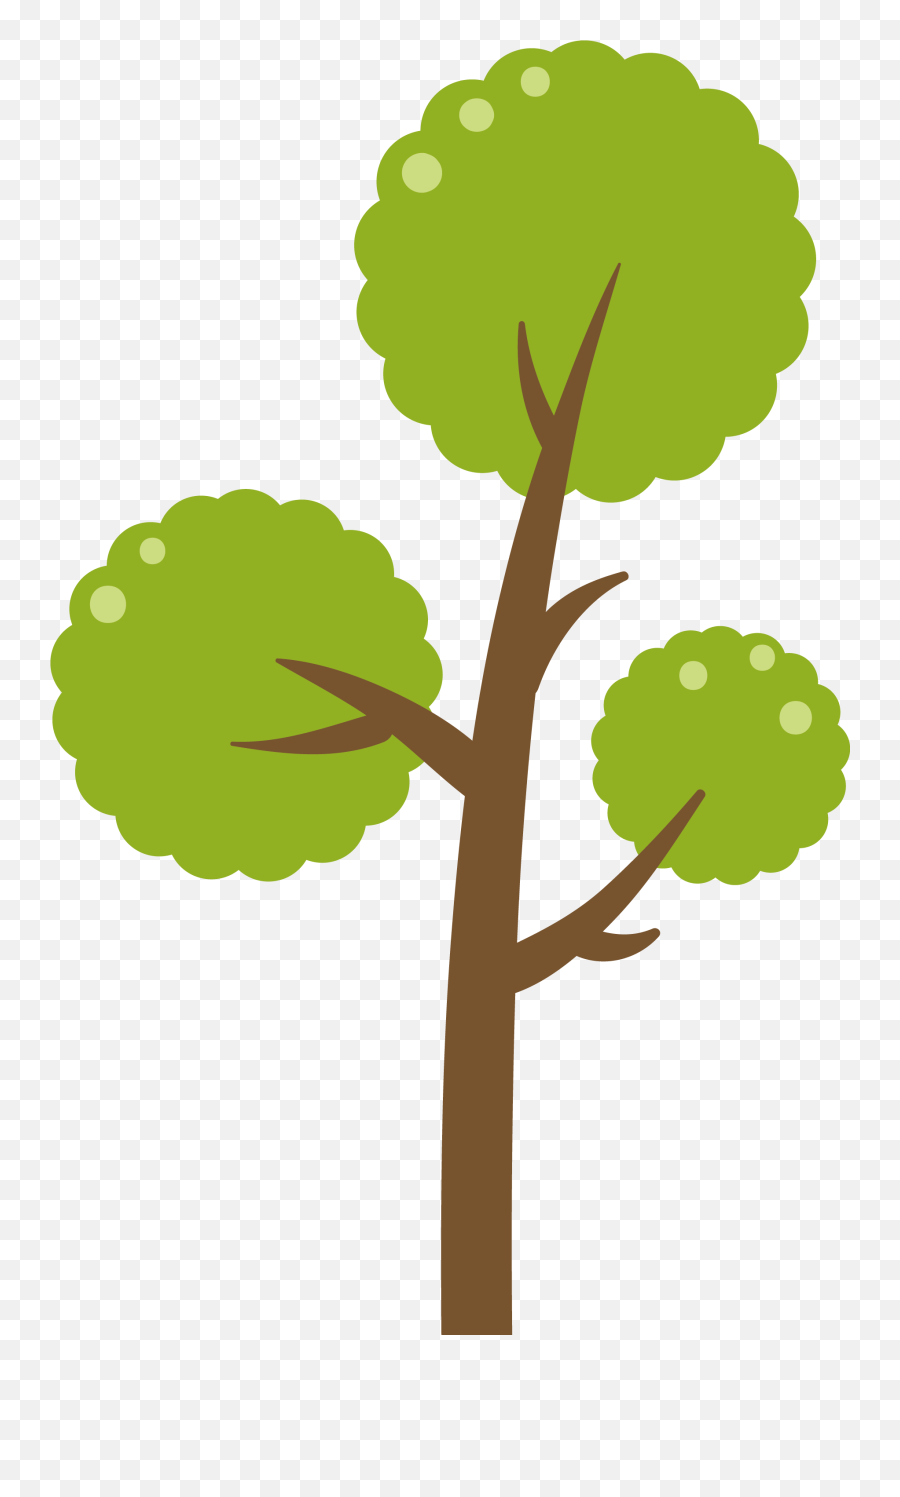 Green Tree Vector Diagram Png Download - 18172944 Free Tree Vector Free No Background,Green Png